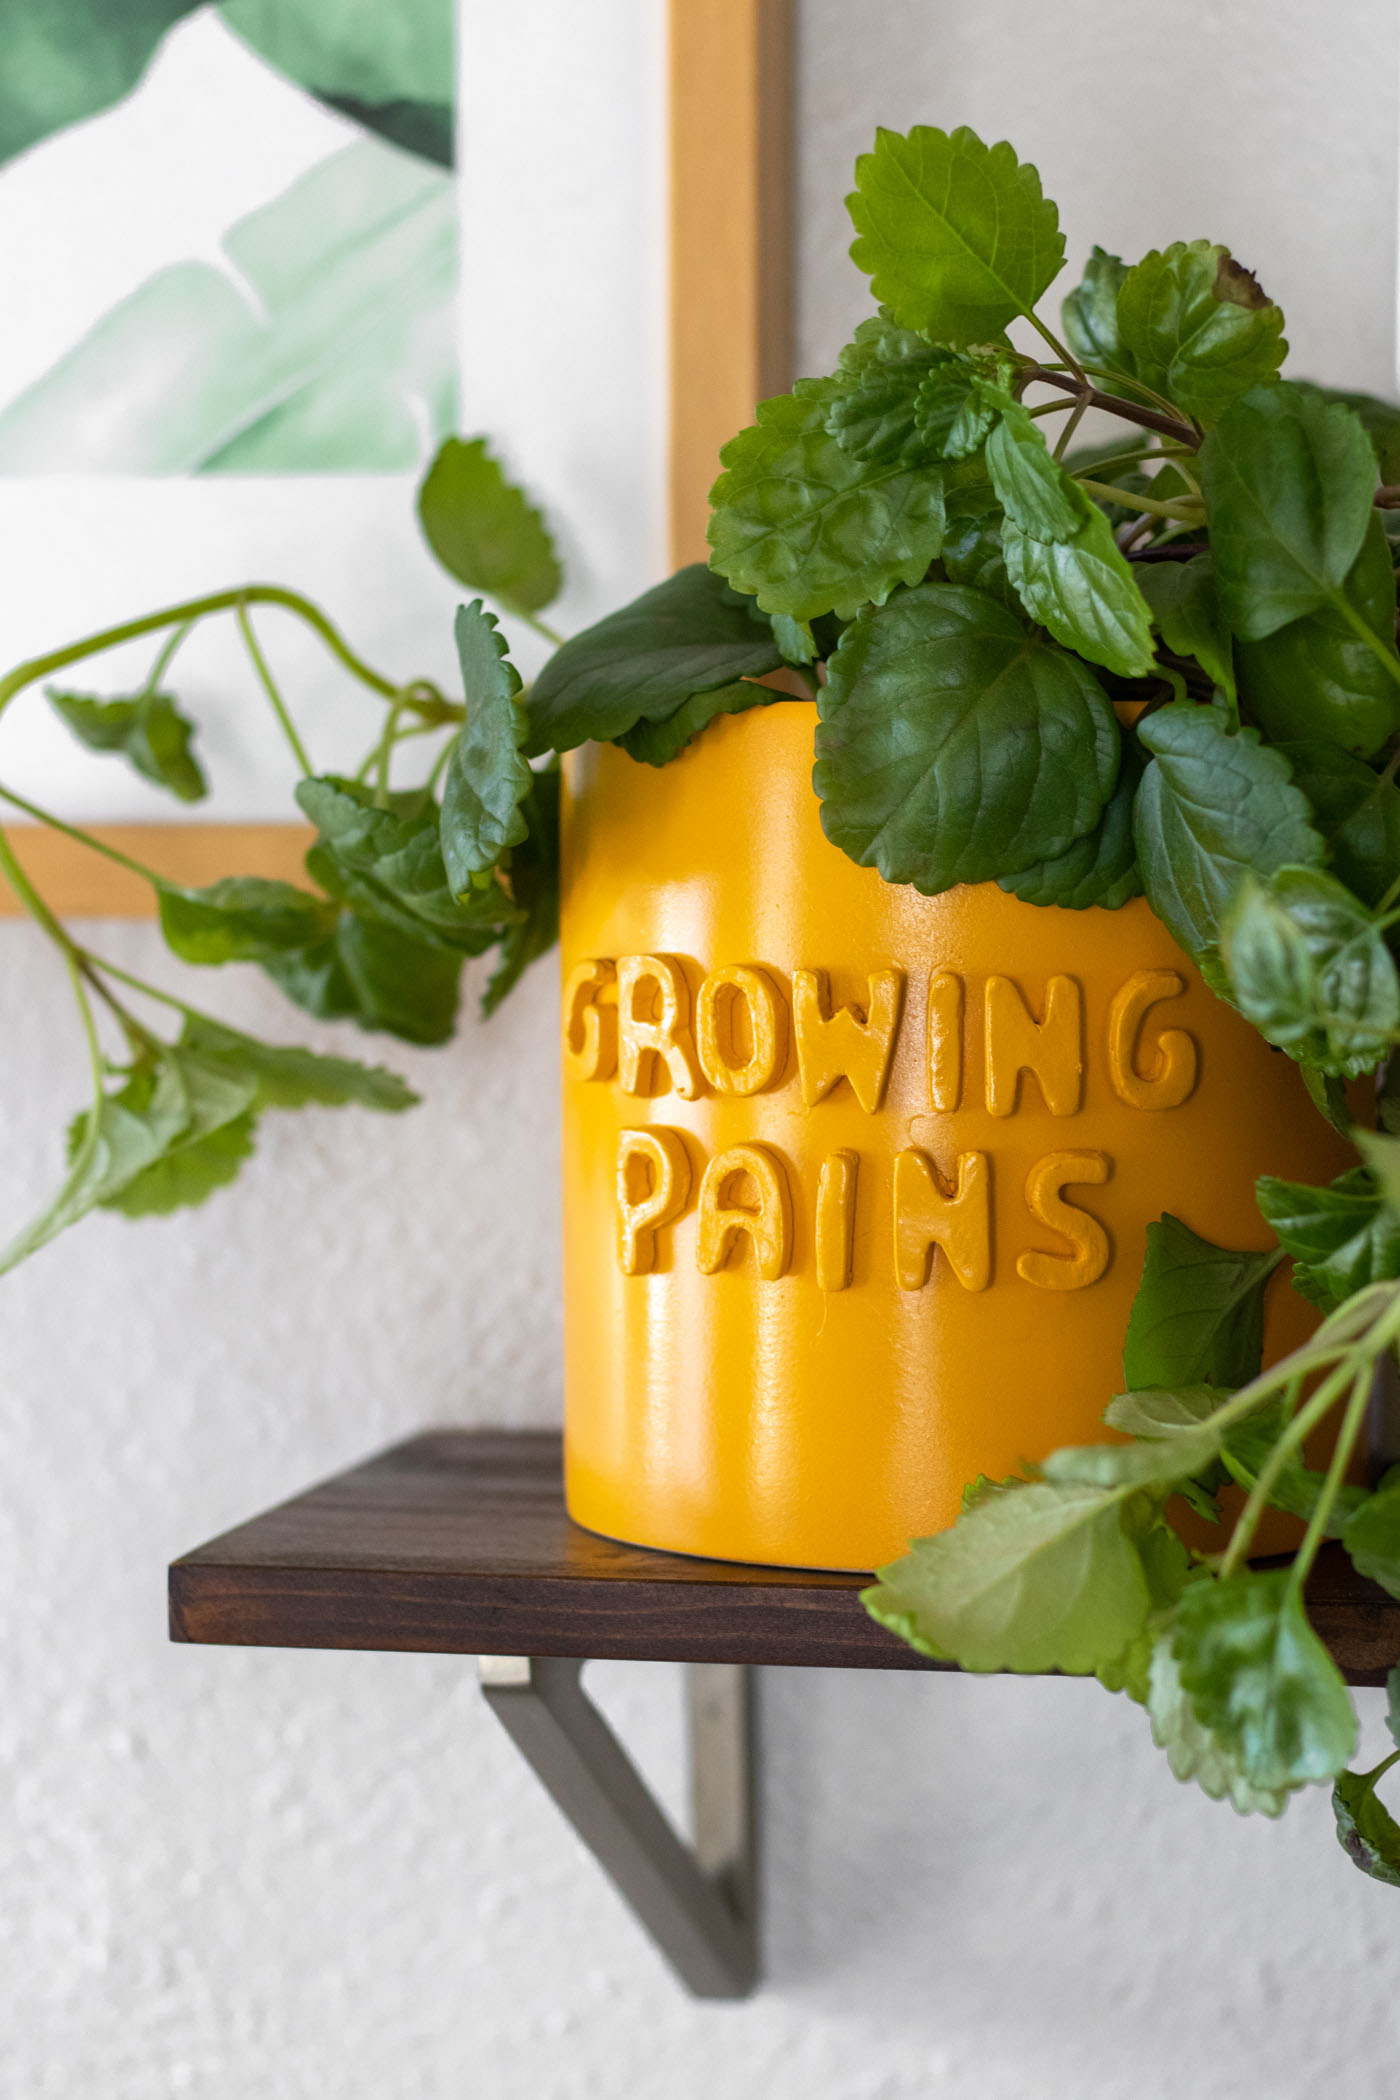 DIY 3D Graphic Planter Pots (Anthropologie Knock-Off) | Club Crafted